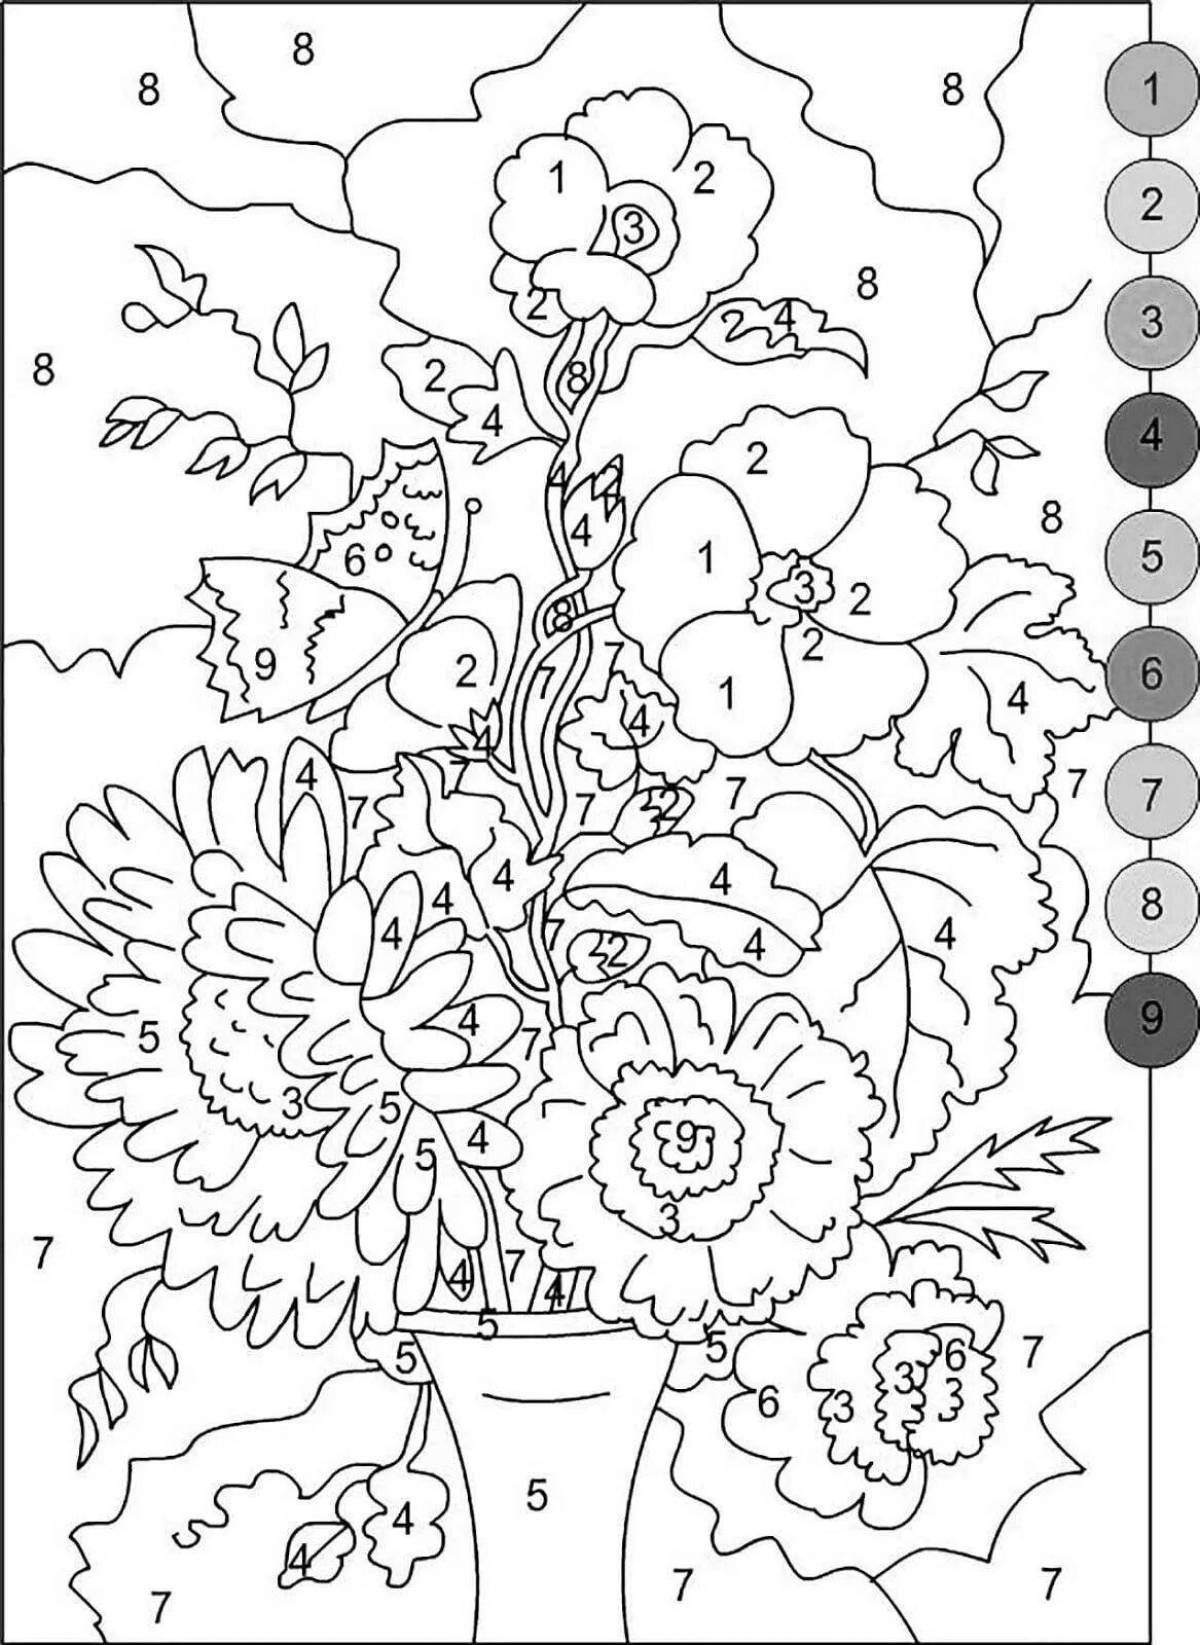 Color-fun set by numbers coloring page